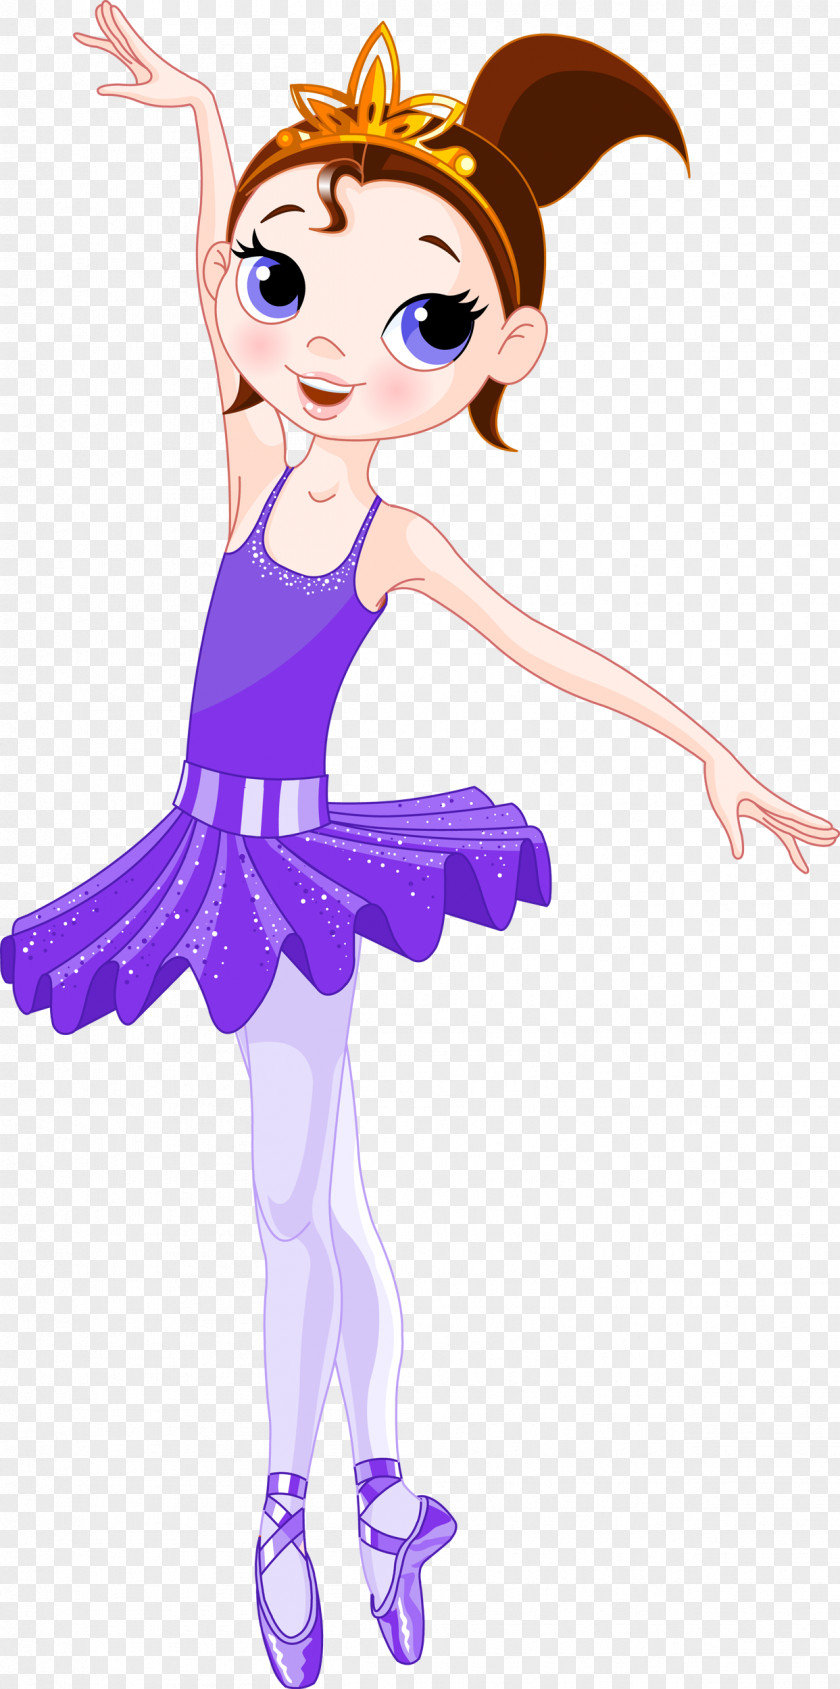 Fairy Royalty-free Clip Art PNG